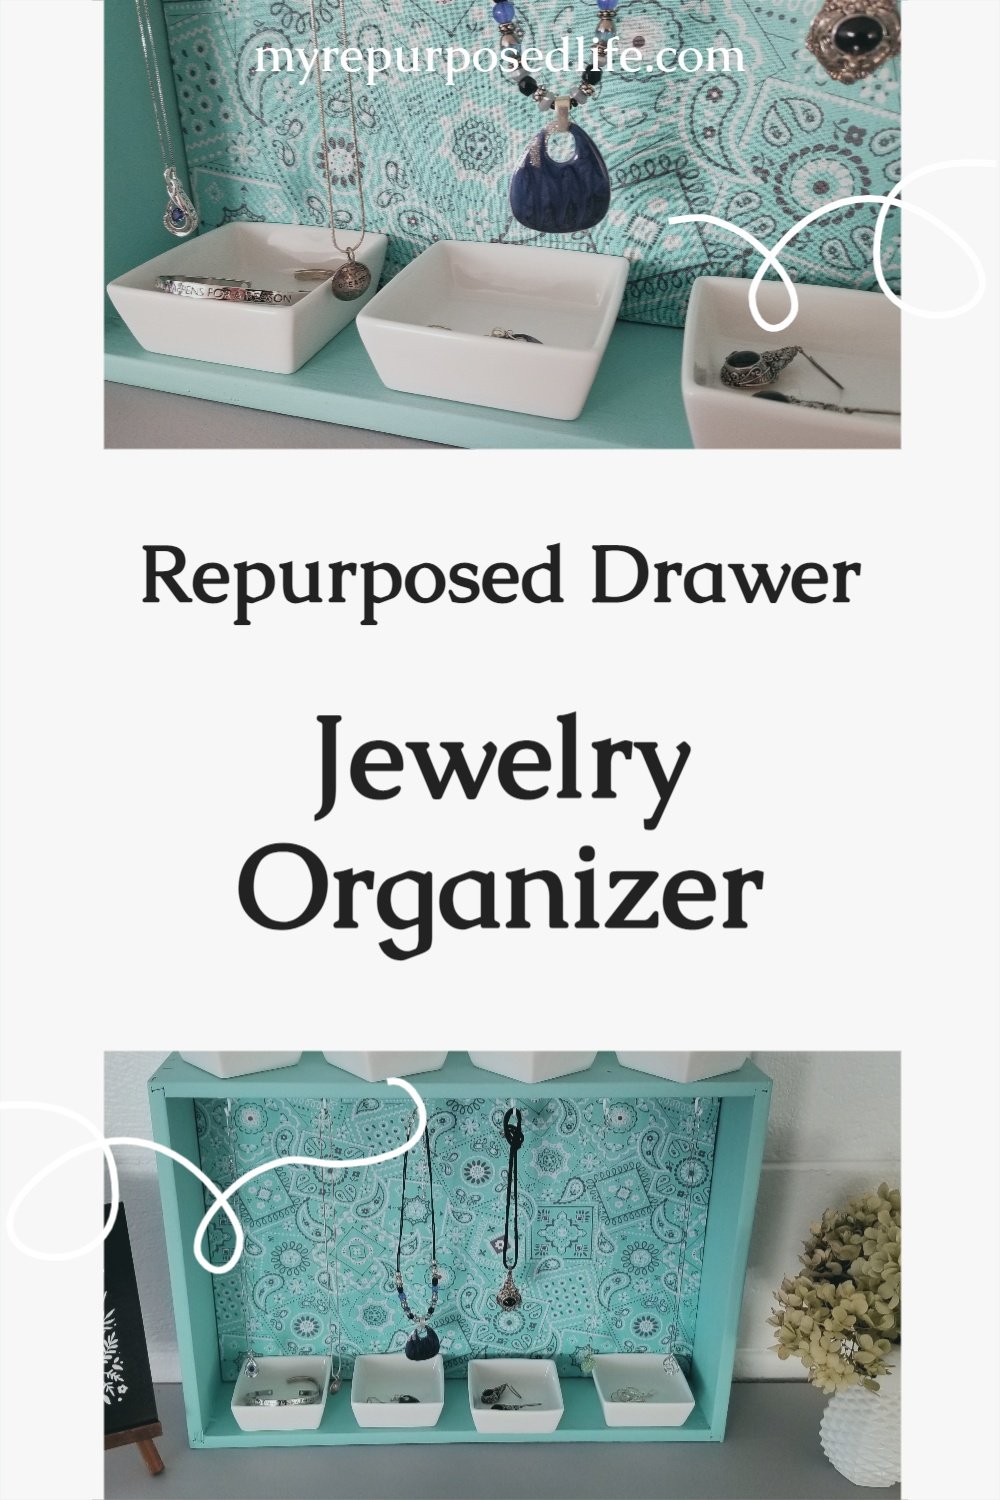 How to make your own repurposed drawer jewelry organizer. I used an old drawer, but you could easily customize this project by making a box out of 1x4's. This jewelry organizer can hang on the wall or rest on a dresser. The small white dishes are perfect for holding smaller items such as earrings or bracelets. #MyRepurposedLife #repurposed #furniture #drawer #jewelry #organizer #diy #project via @repurposedlife